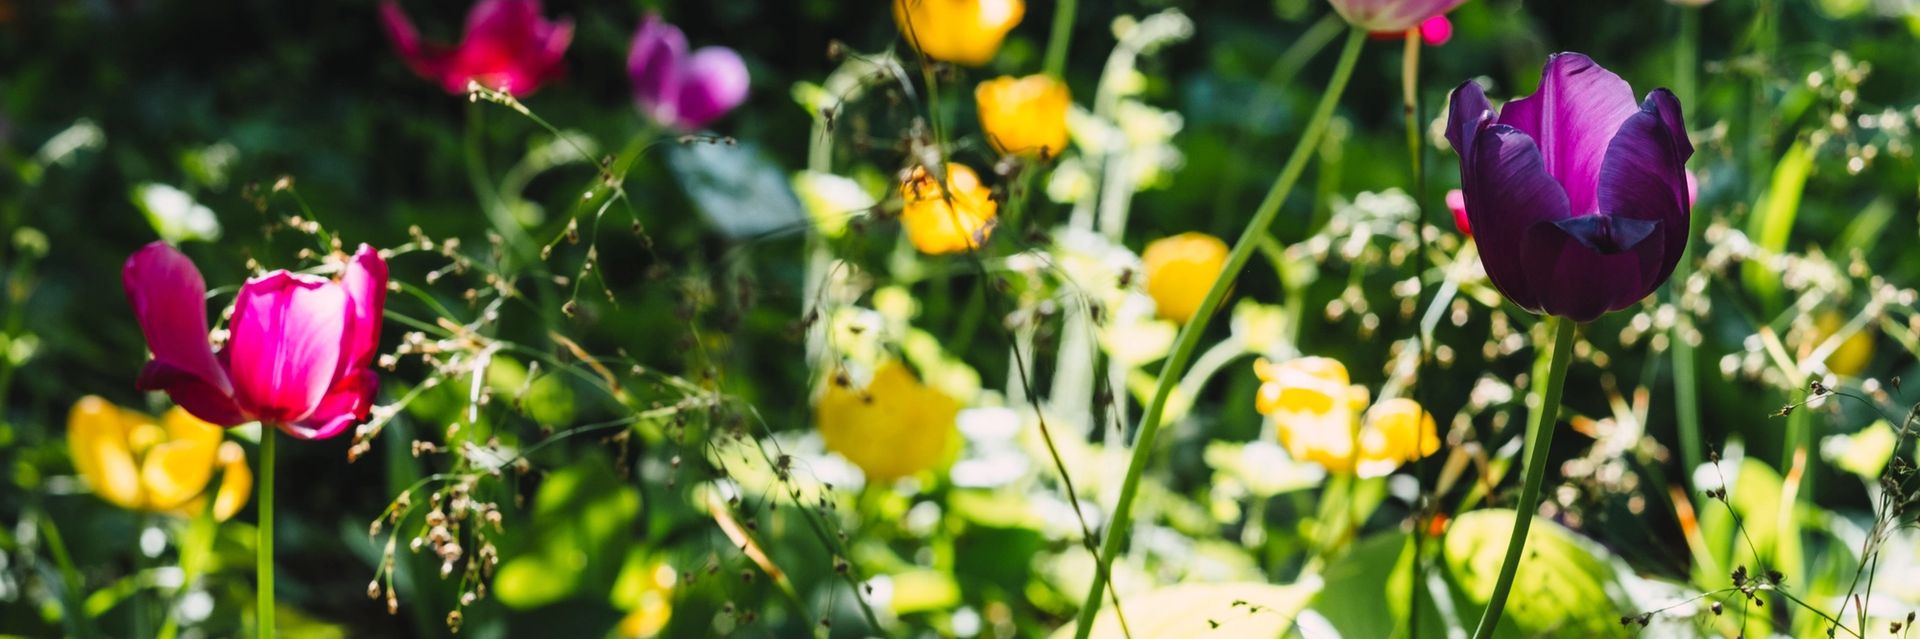 How to garden when the weather is hot